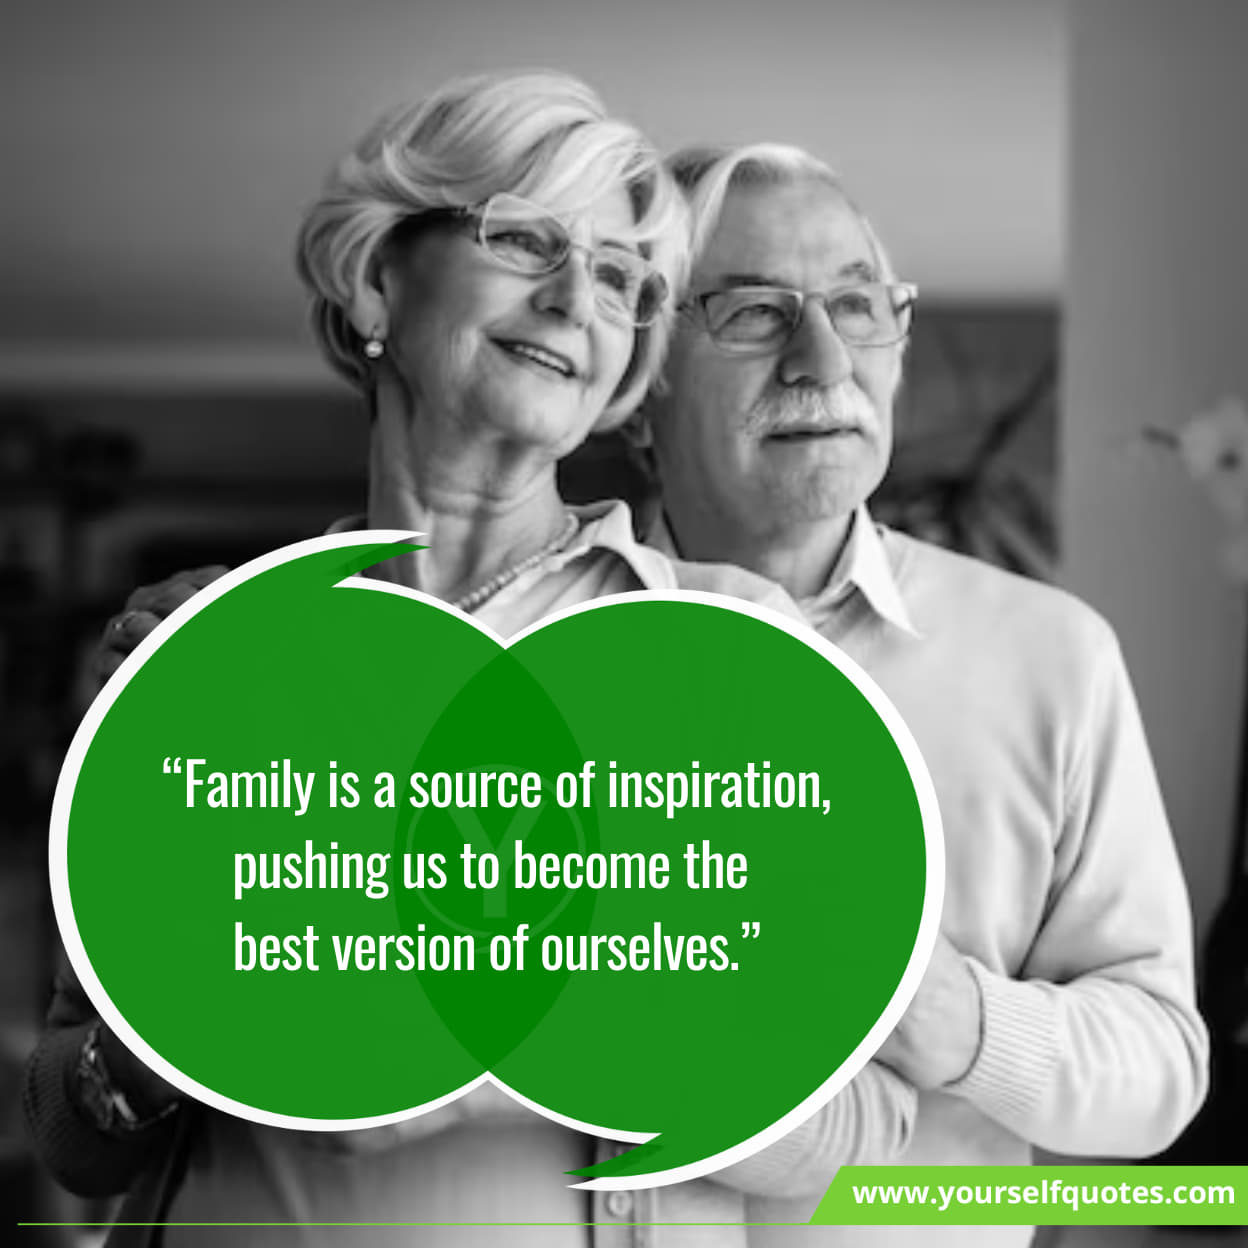 Quotes to inspire gratitude in your family